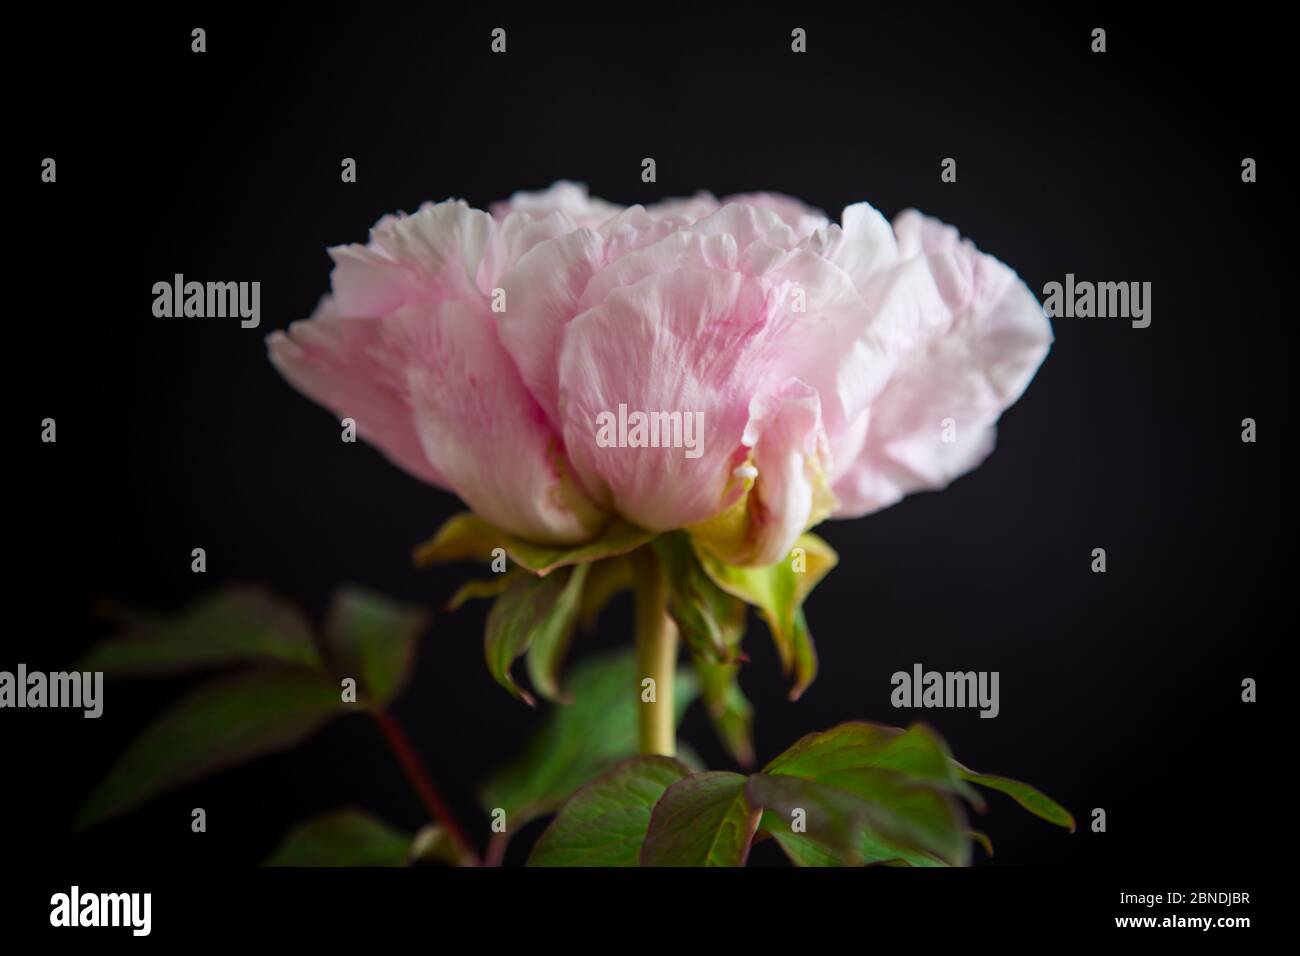 blooming pink tree peony flower on black background Stock Photo